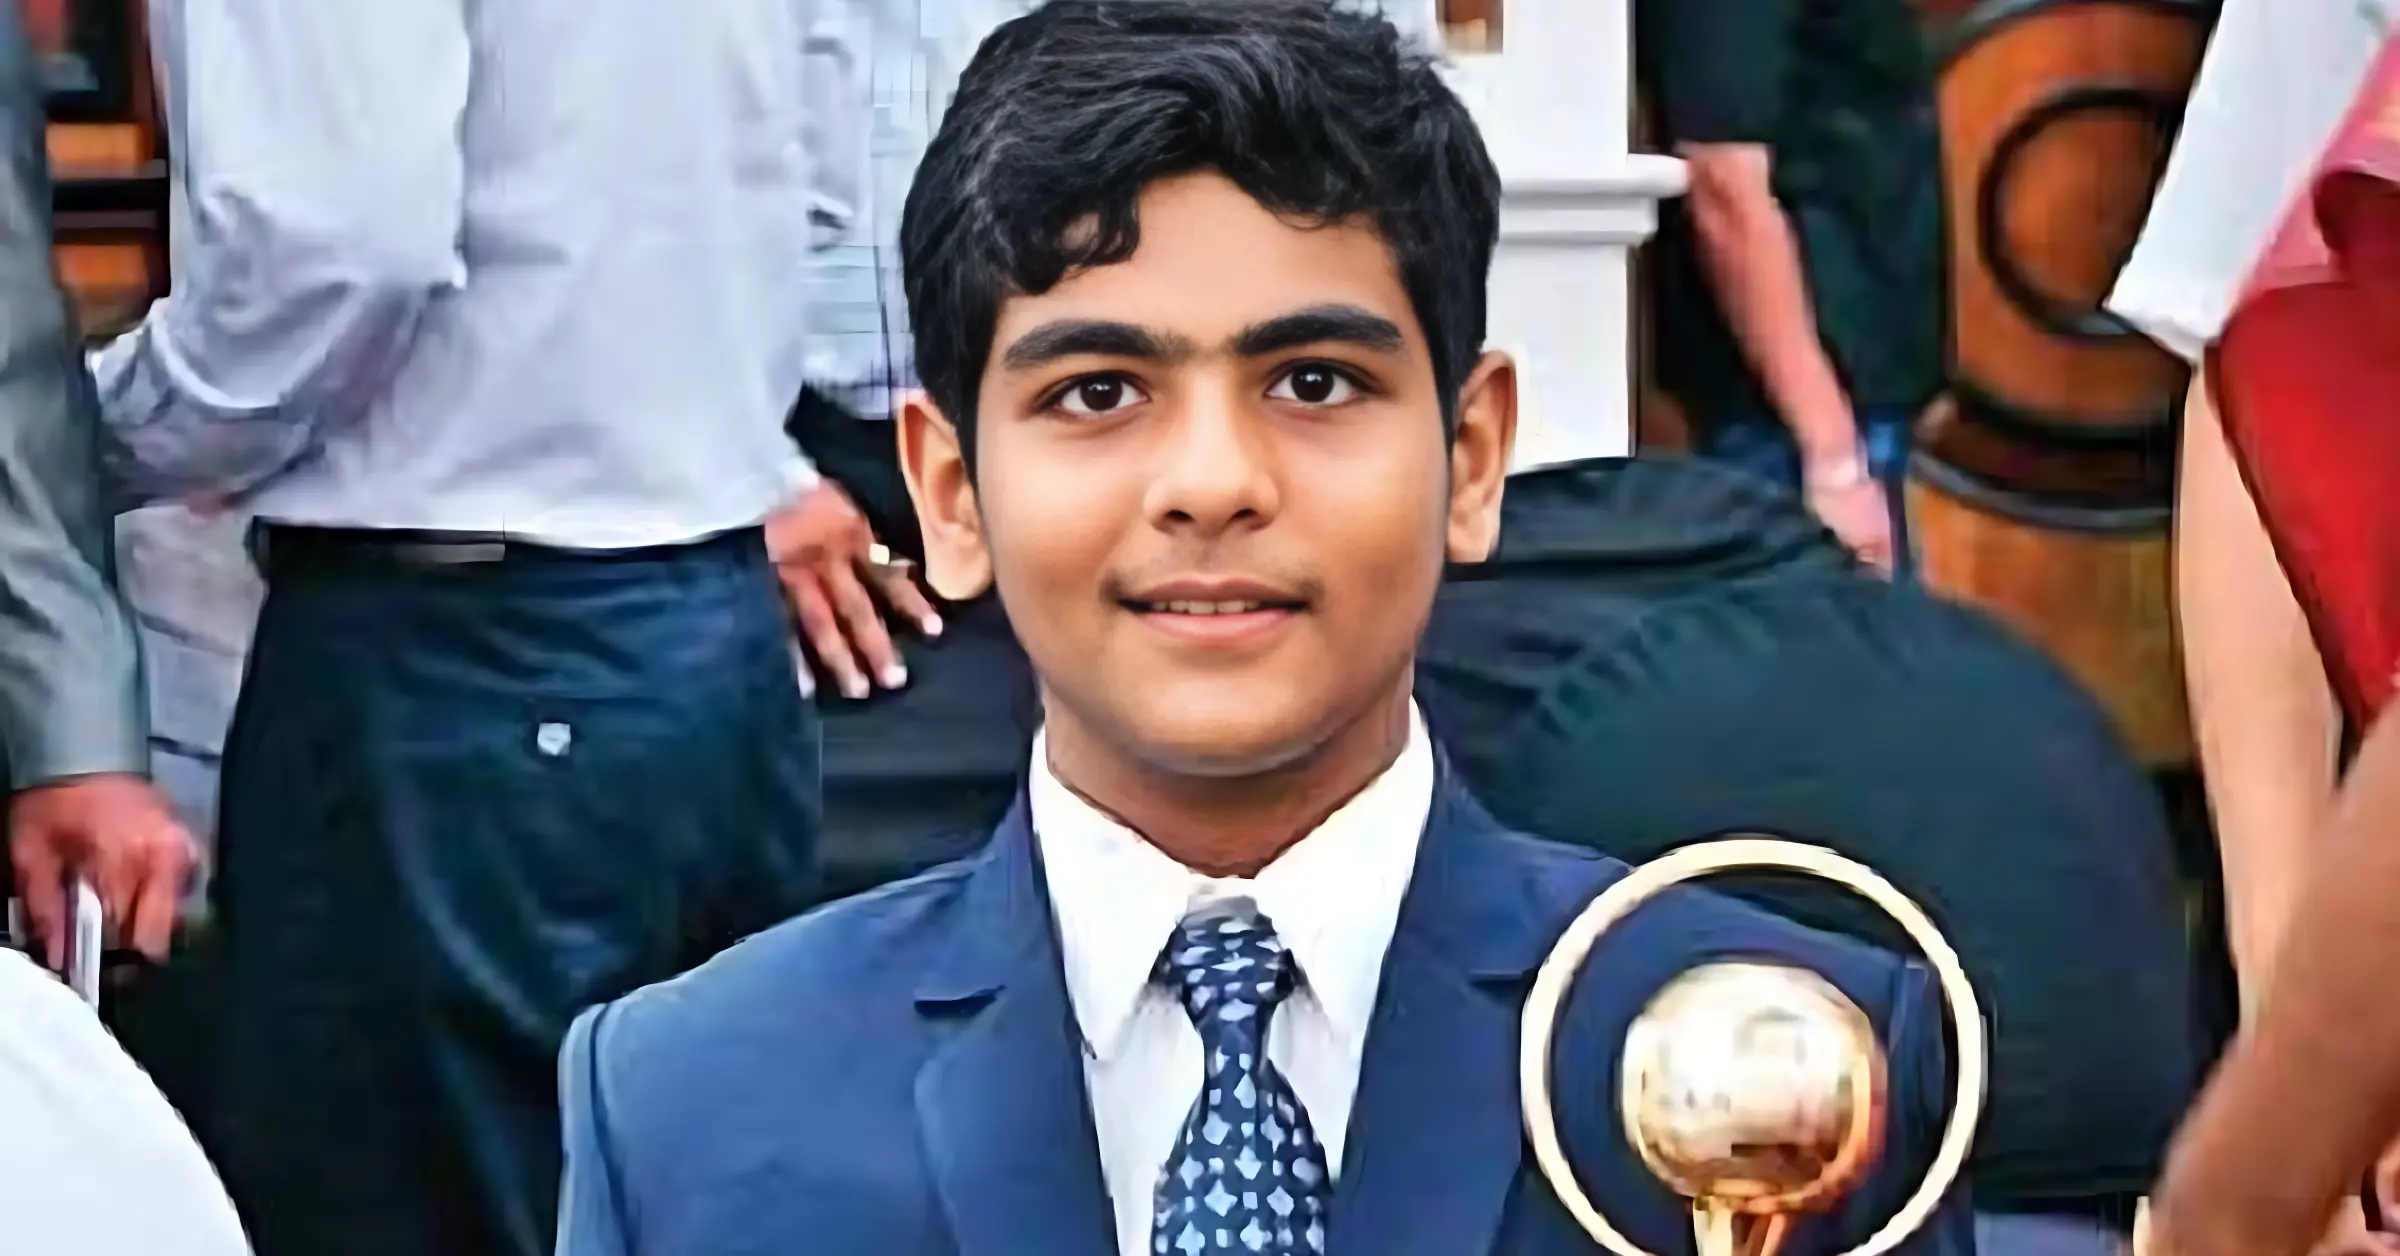 Meet Nirbhay Thacker, India’s Youngest Engineer Who Completed 8 — 12 Classes In Just 9 Months | INFORMEIA